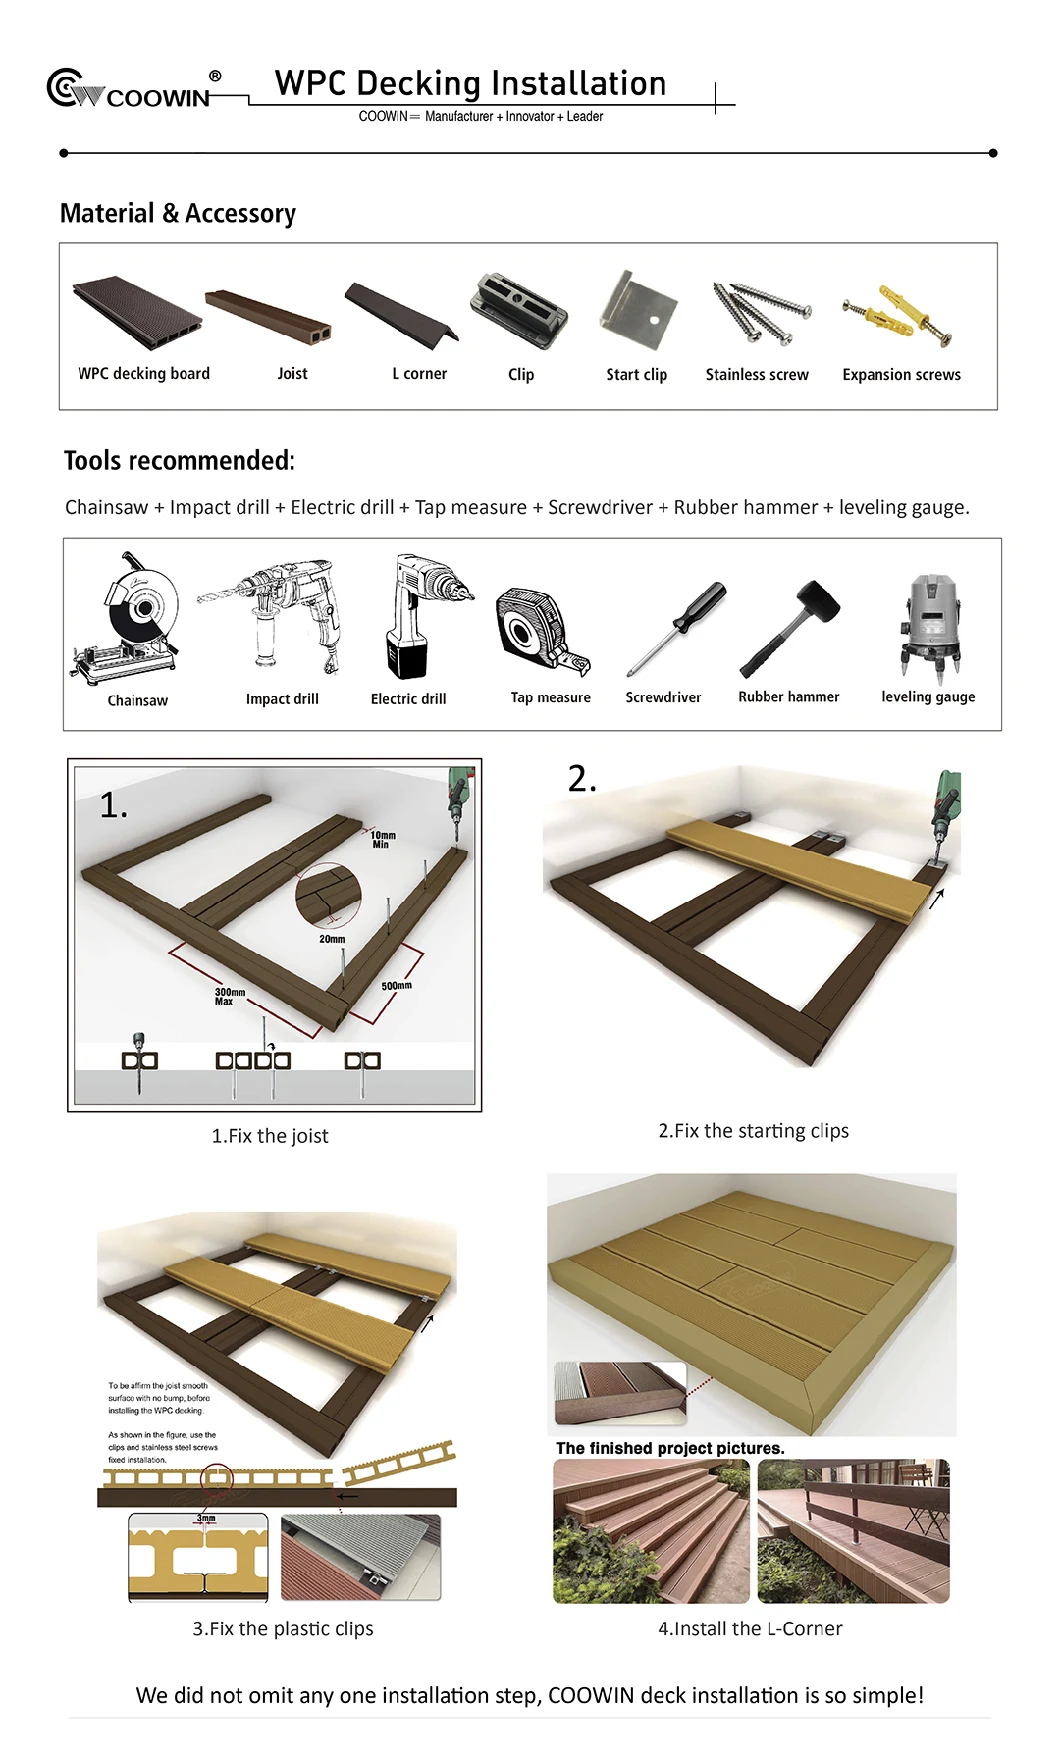 Backyard WPC Timber Boards, New Timber Decking for Garden Yard, Wood Plastic Composite Timber Boards